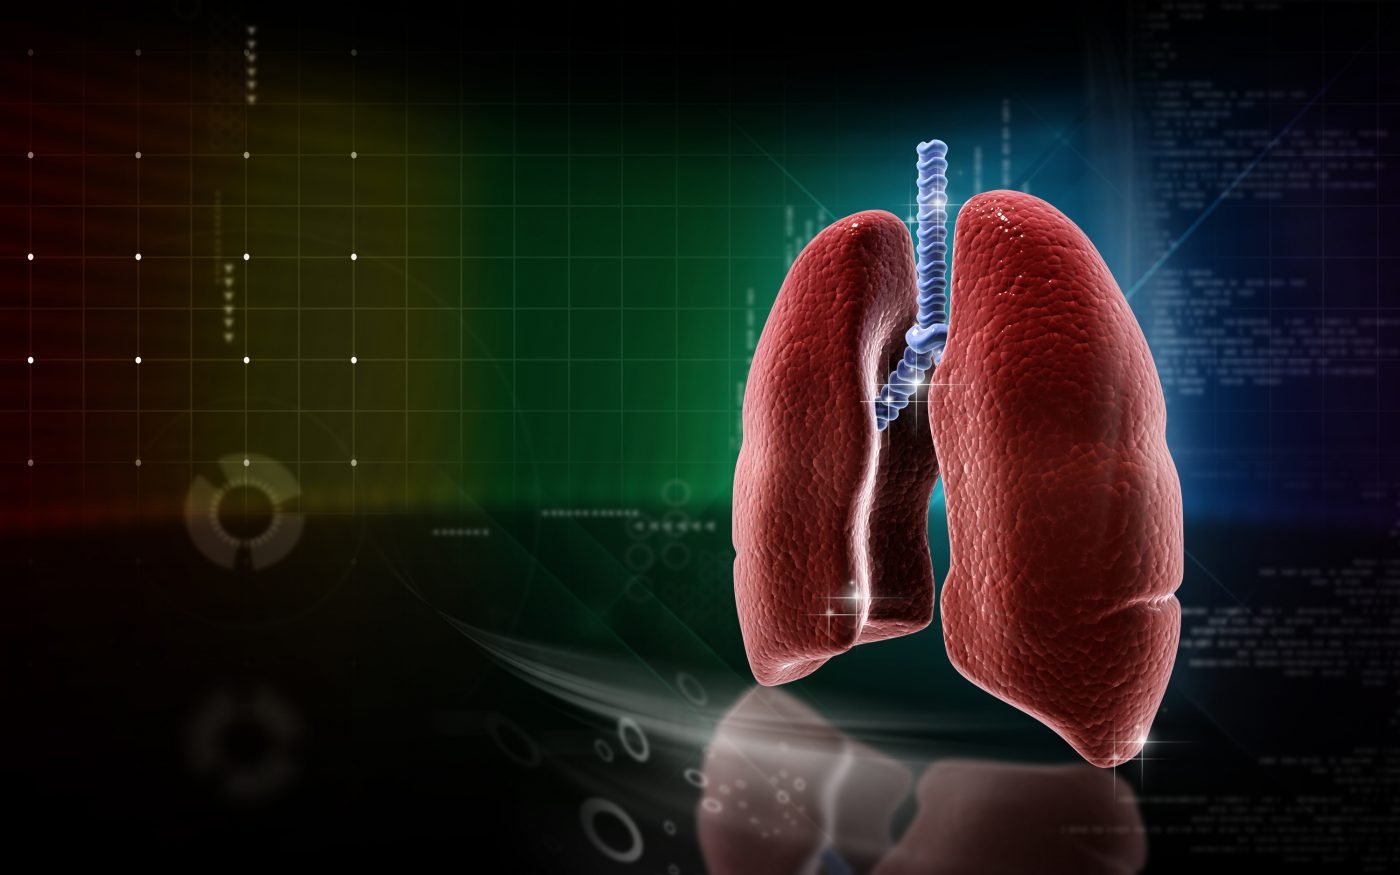 Engineered Cell Models Seen as Best for Capturing Living Lung Response